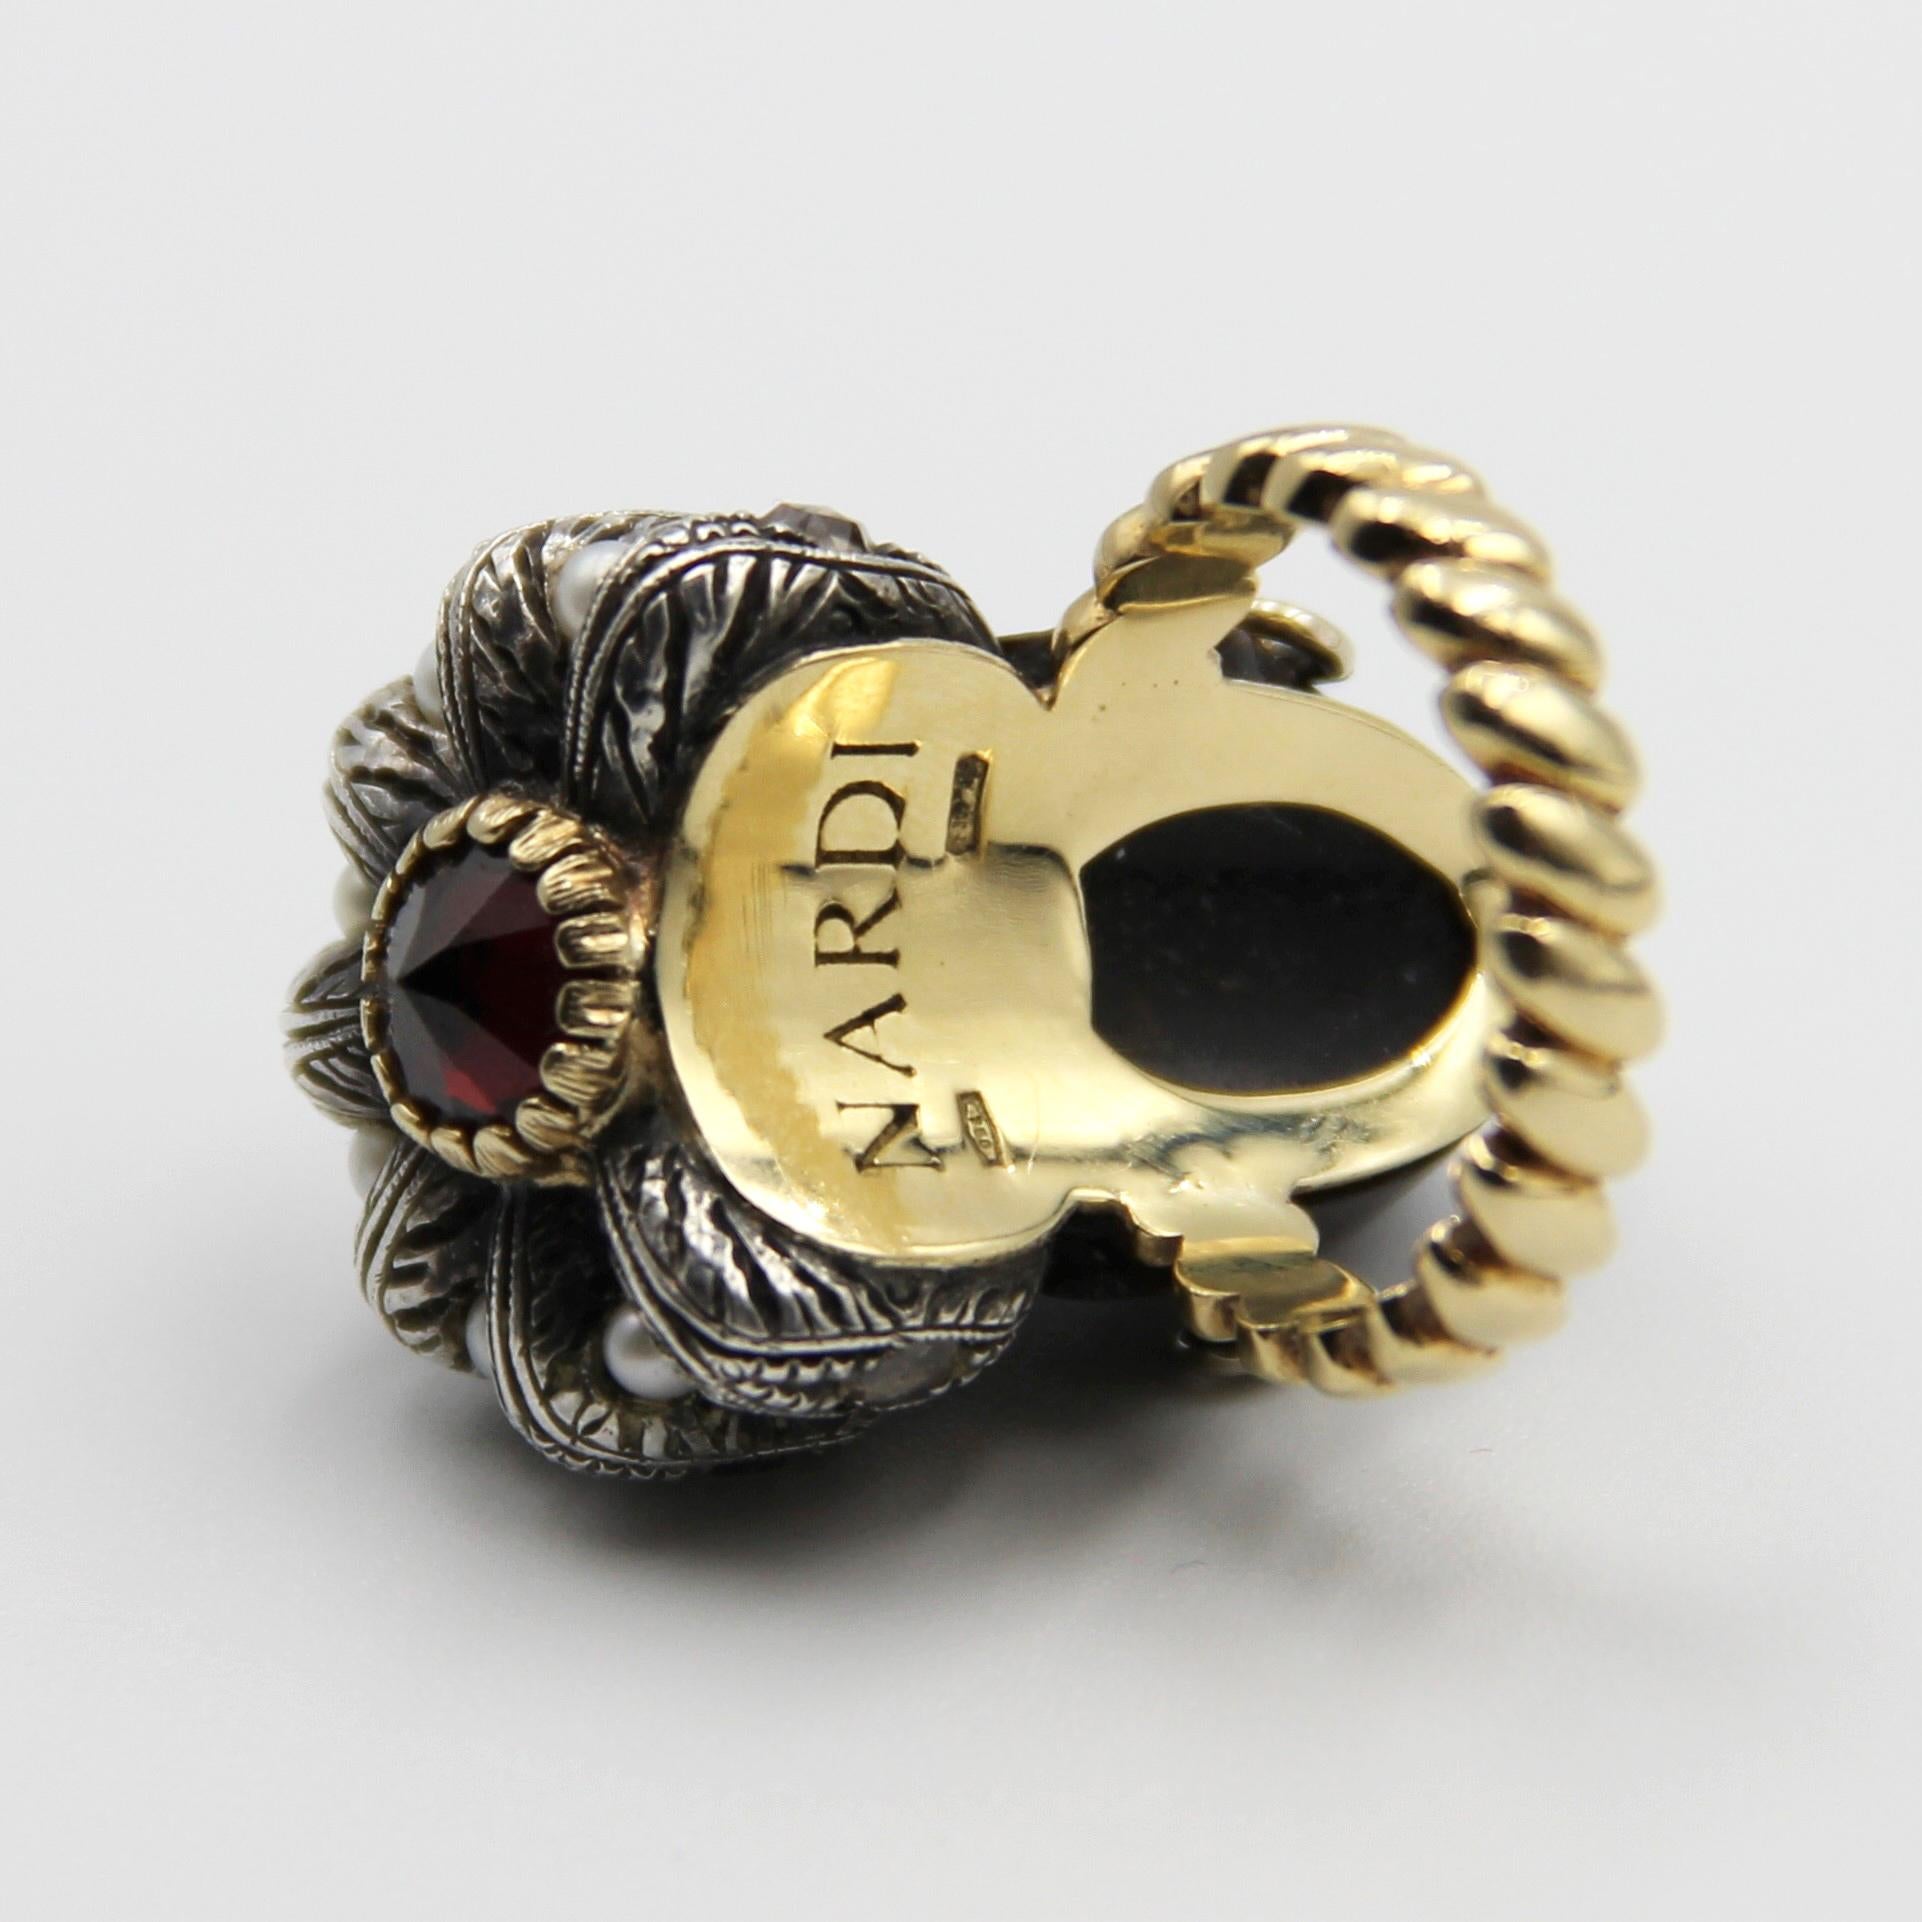 Round Cut Nardi Moretto 18k Gold and Silver Diamond Ring with Garnet For Sale